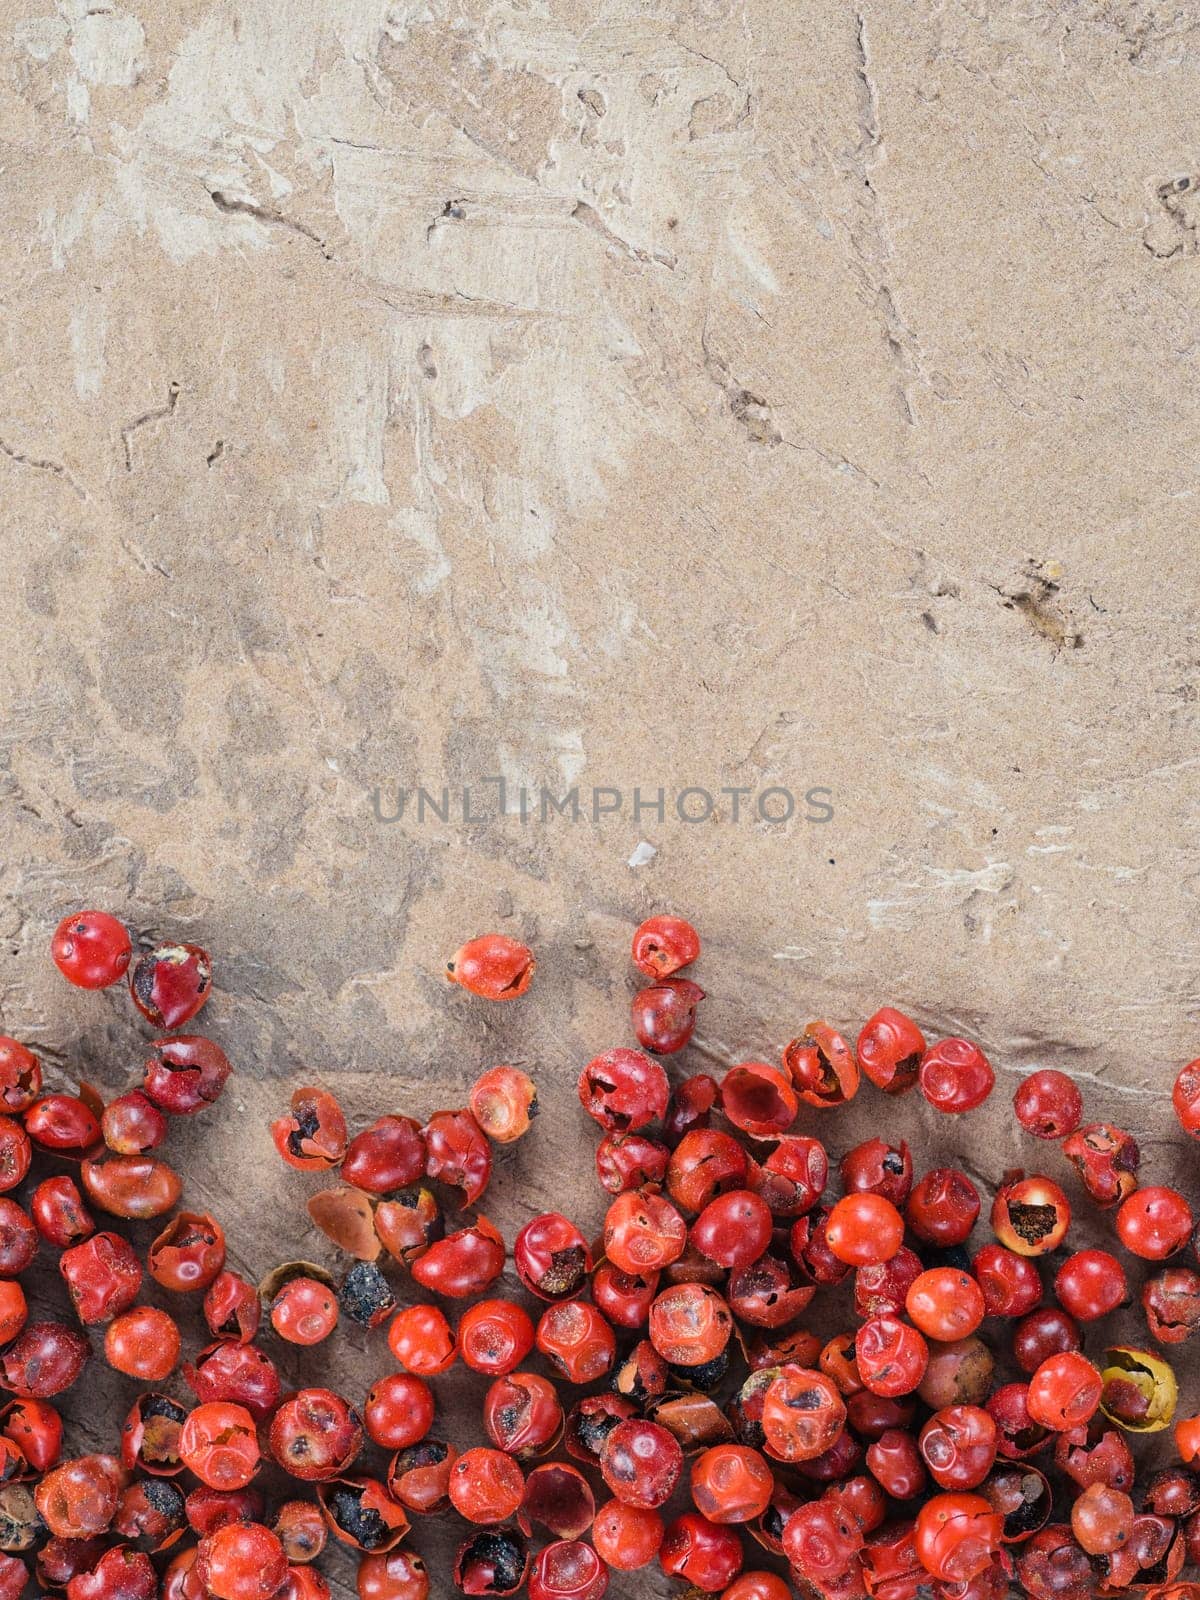 Background with dried pink pepper berries on brown concrete background. Top view of pink peppercorn. Copy space.